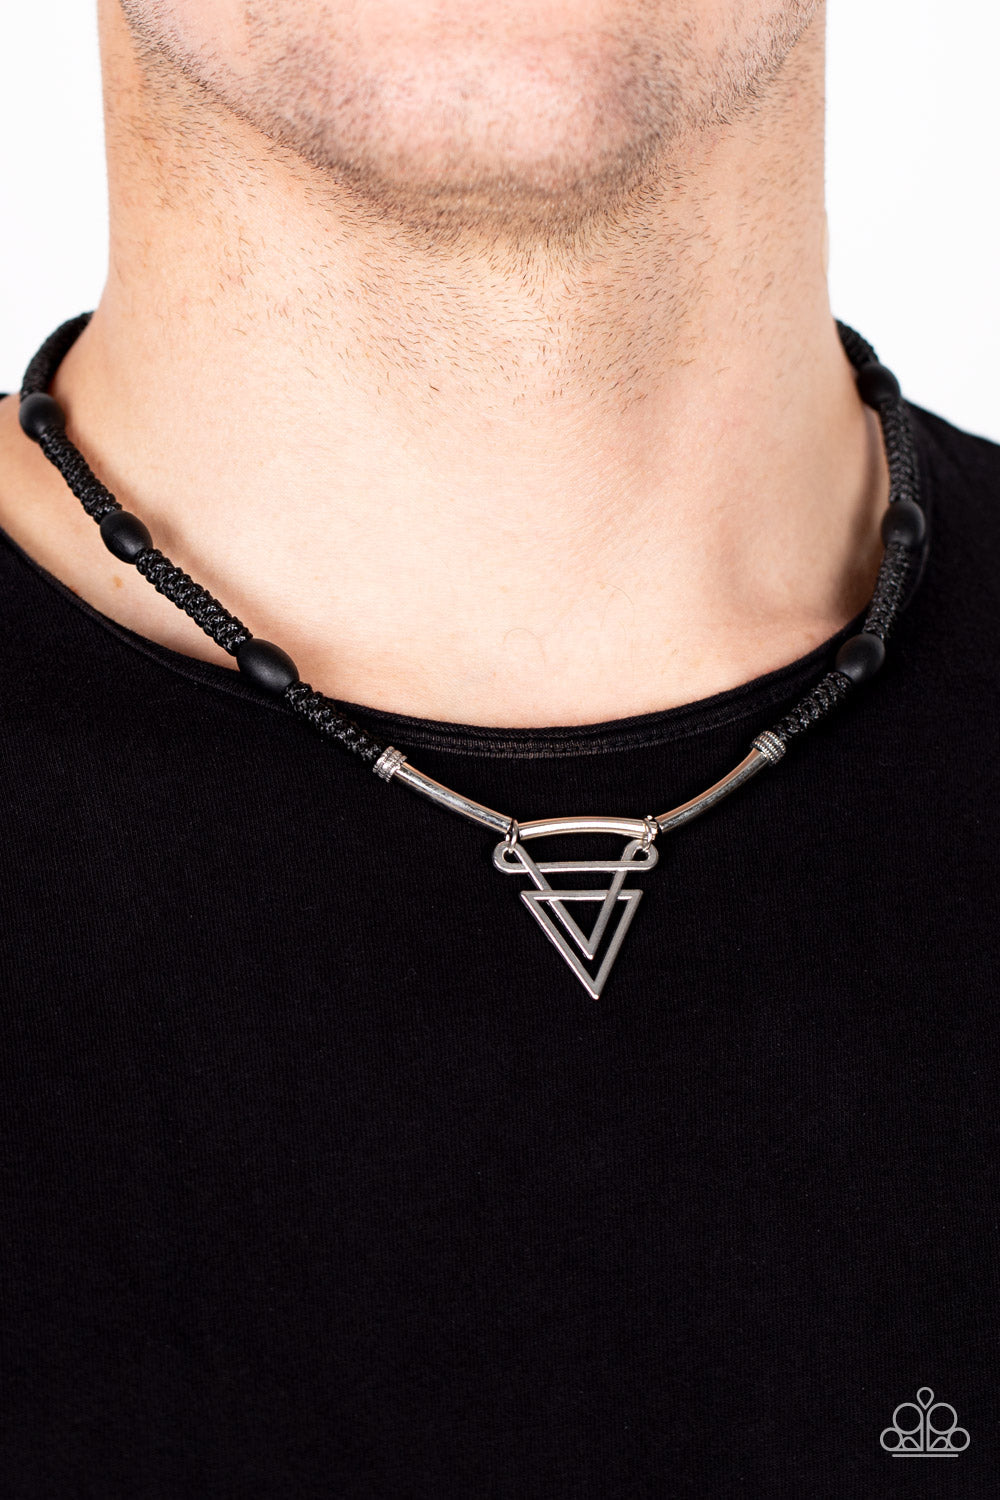 Arrowed Admiral - Black Urban Necklace - Paparazzi Accessories - Black wooden beads are knotted in place along a braided black cord below the collar. Infused with silver rod-like beads, an ornately stacked silver triangular pendant swings from the center for a sharp finish.